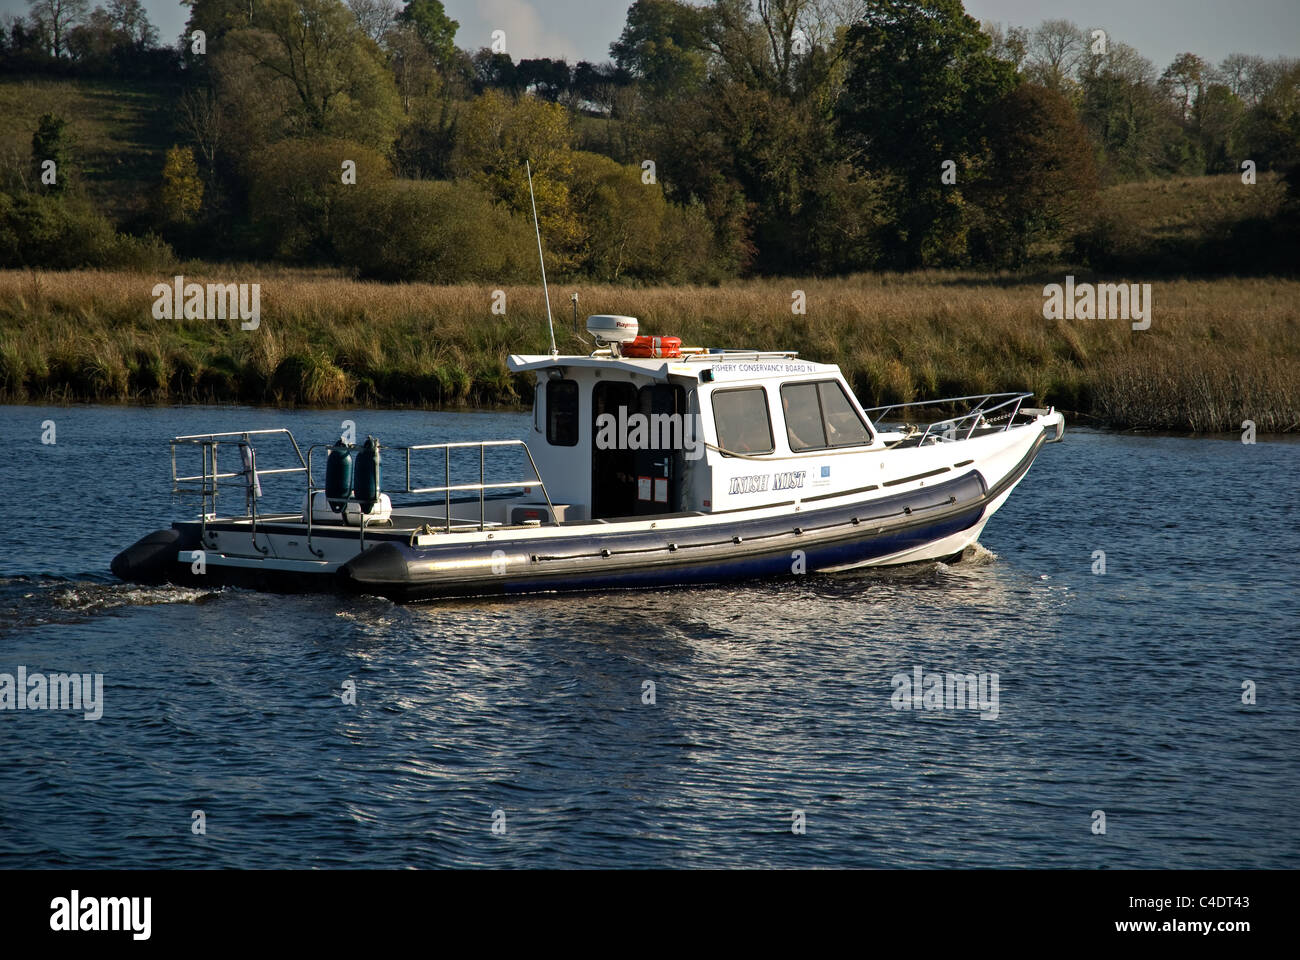 Inish Mist, Fishery Conservancy Boat, Upper Lough Erne, County Fermanagh, Northern Ireland, Fishing Stock Photo